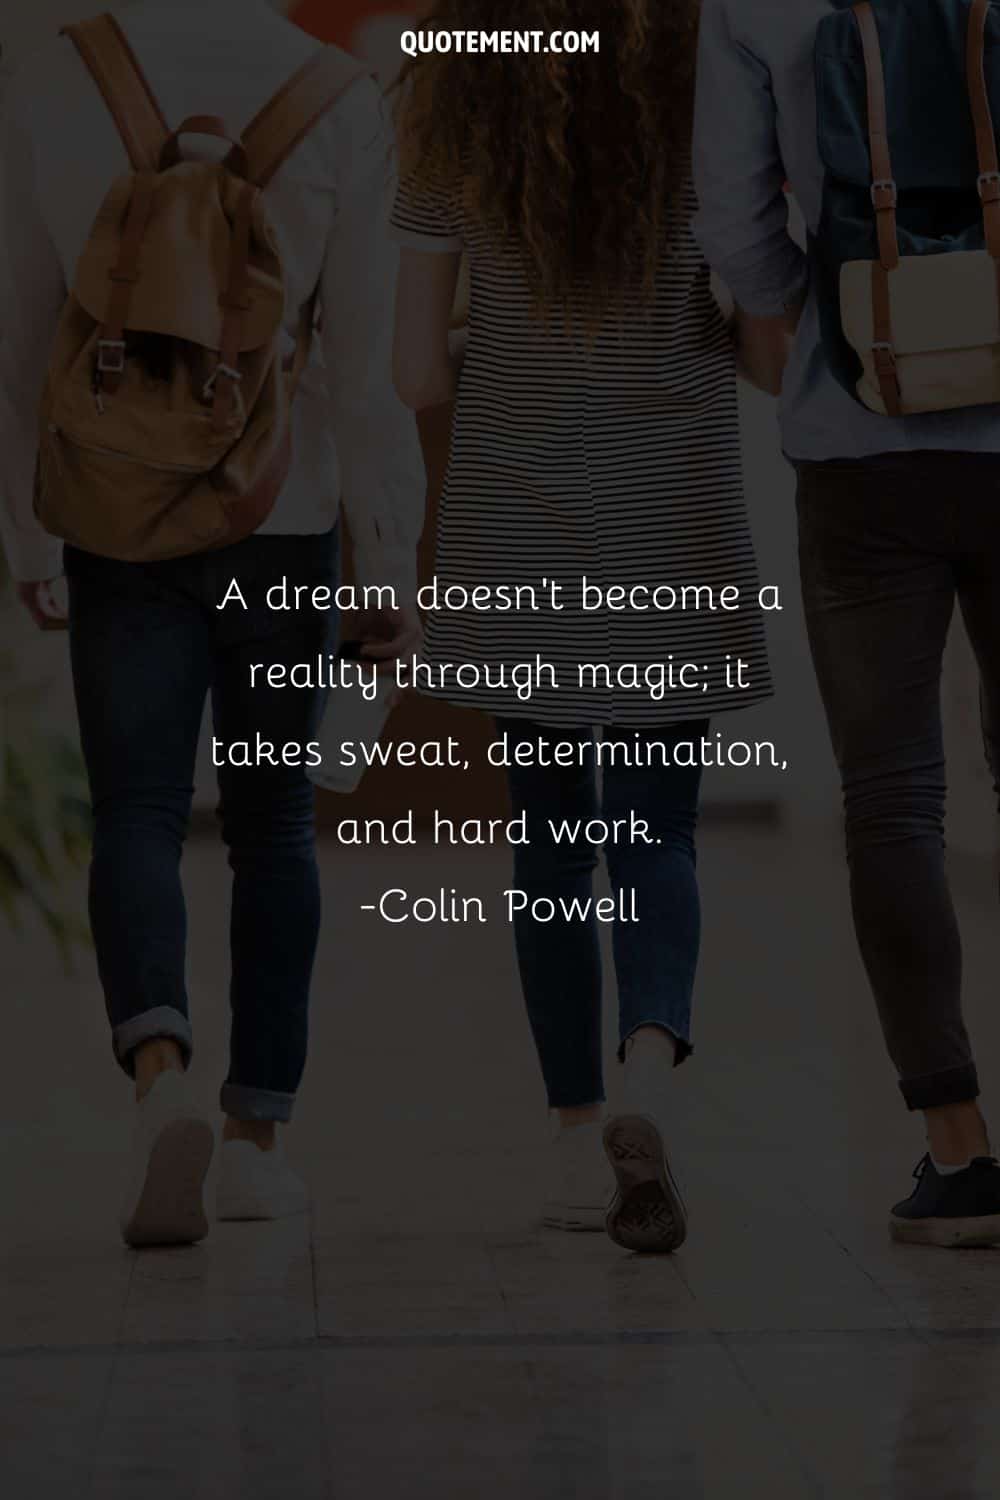 A dream doesn’t become a reality through magic; it takes sweat, determination, and hard work